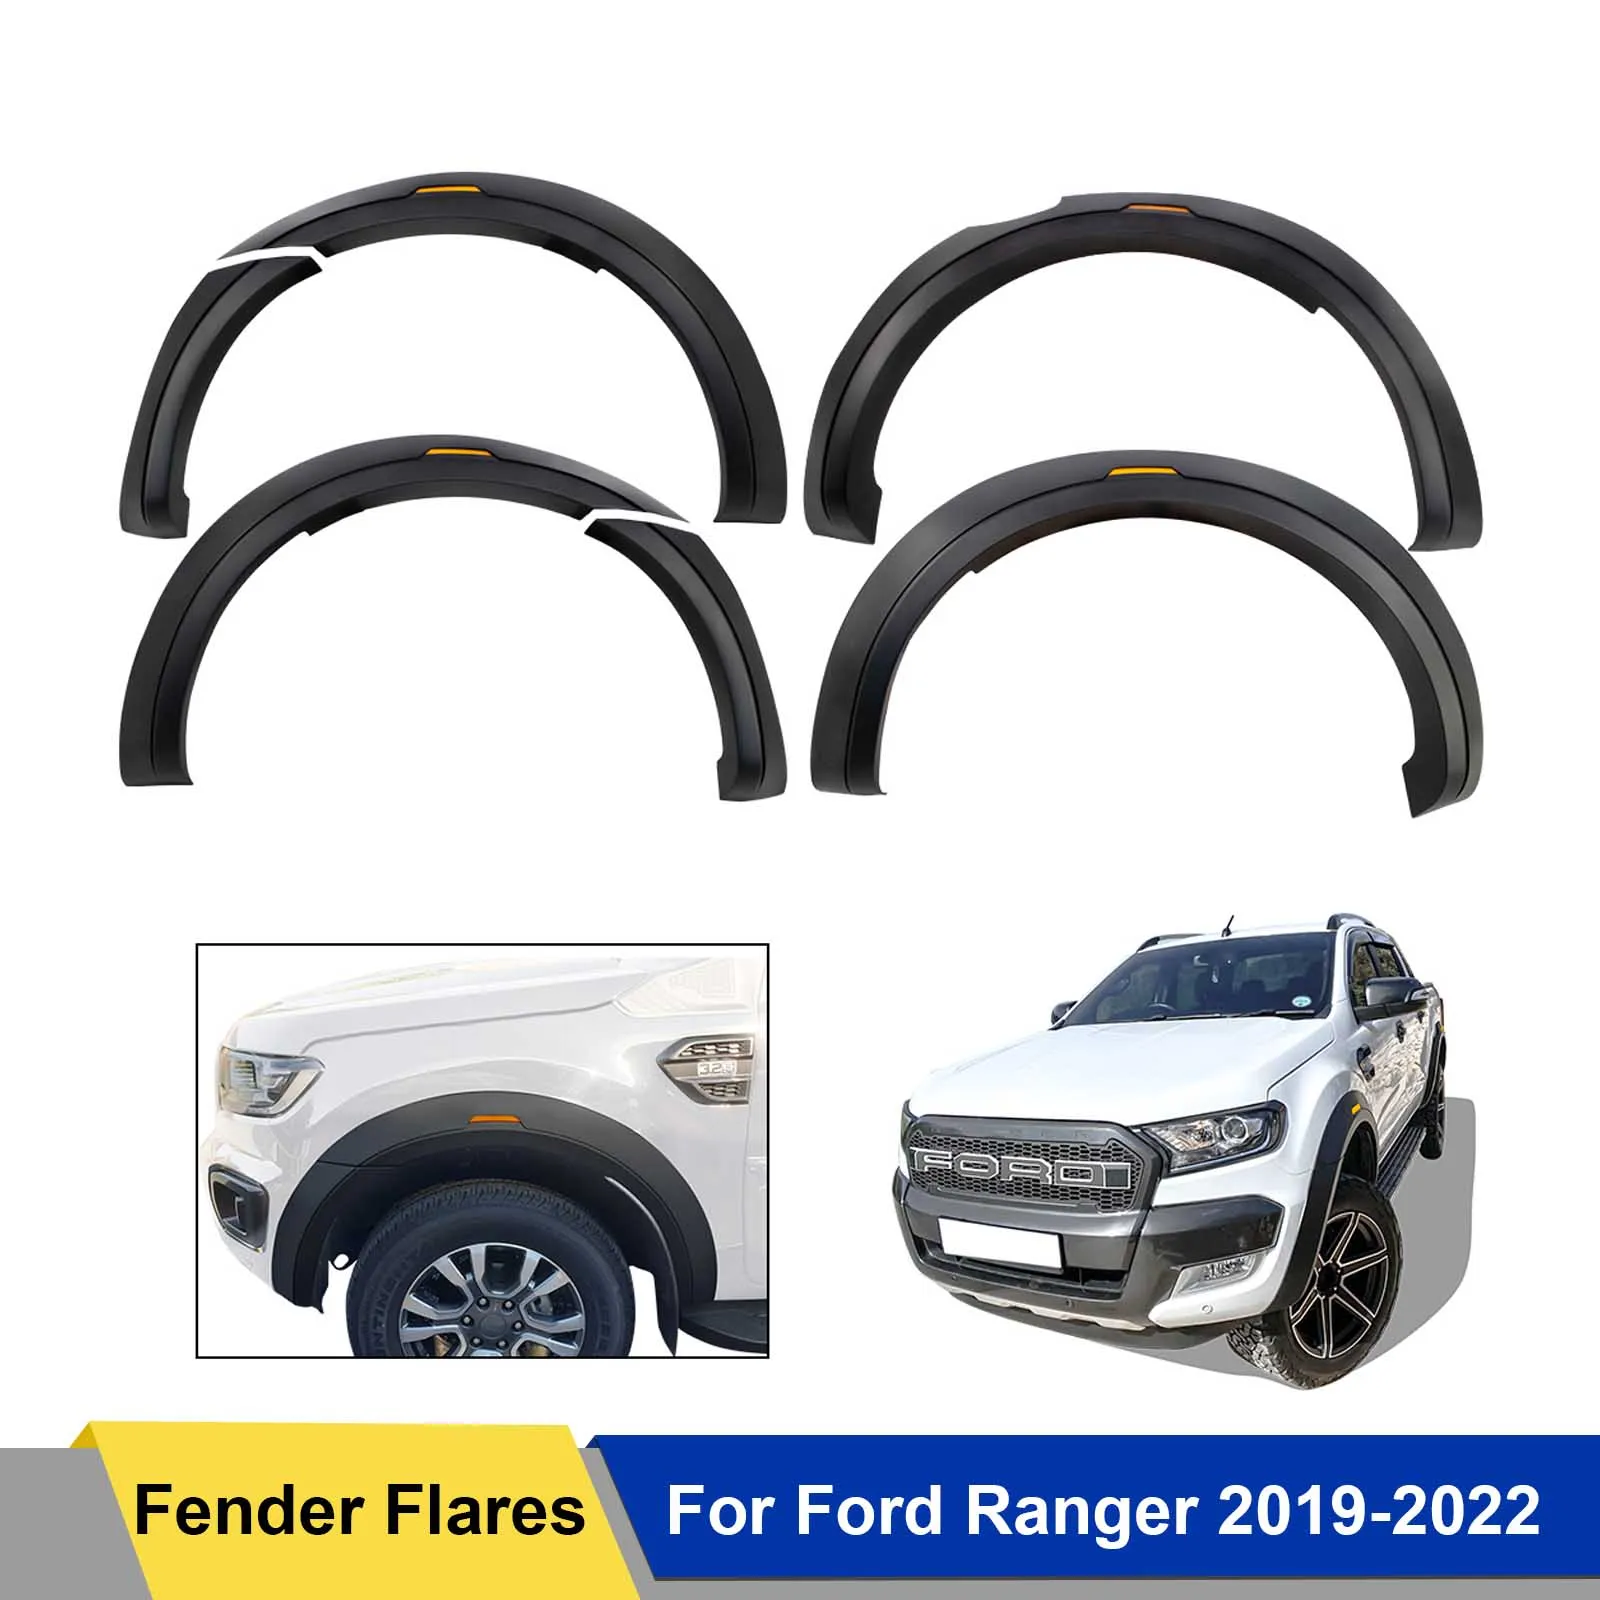 

Fender Flares With Integrated LED Reflector For Ford Ranger 2015-2022 6pcs/set Wheel Arch Guard Protector 4X4 Car Accessories